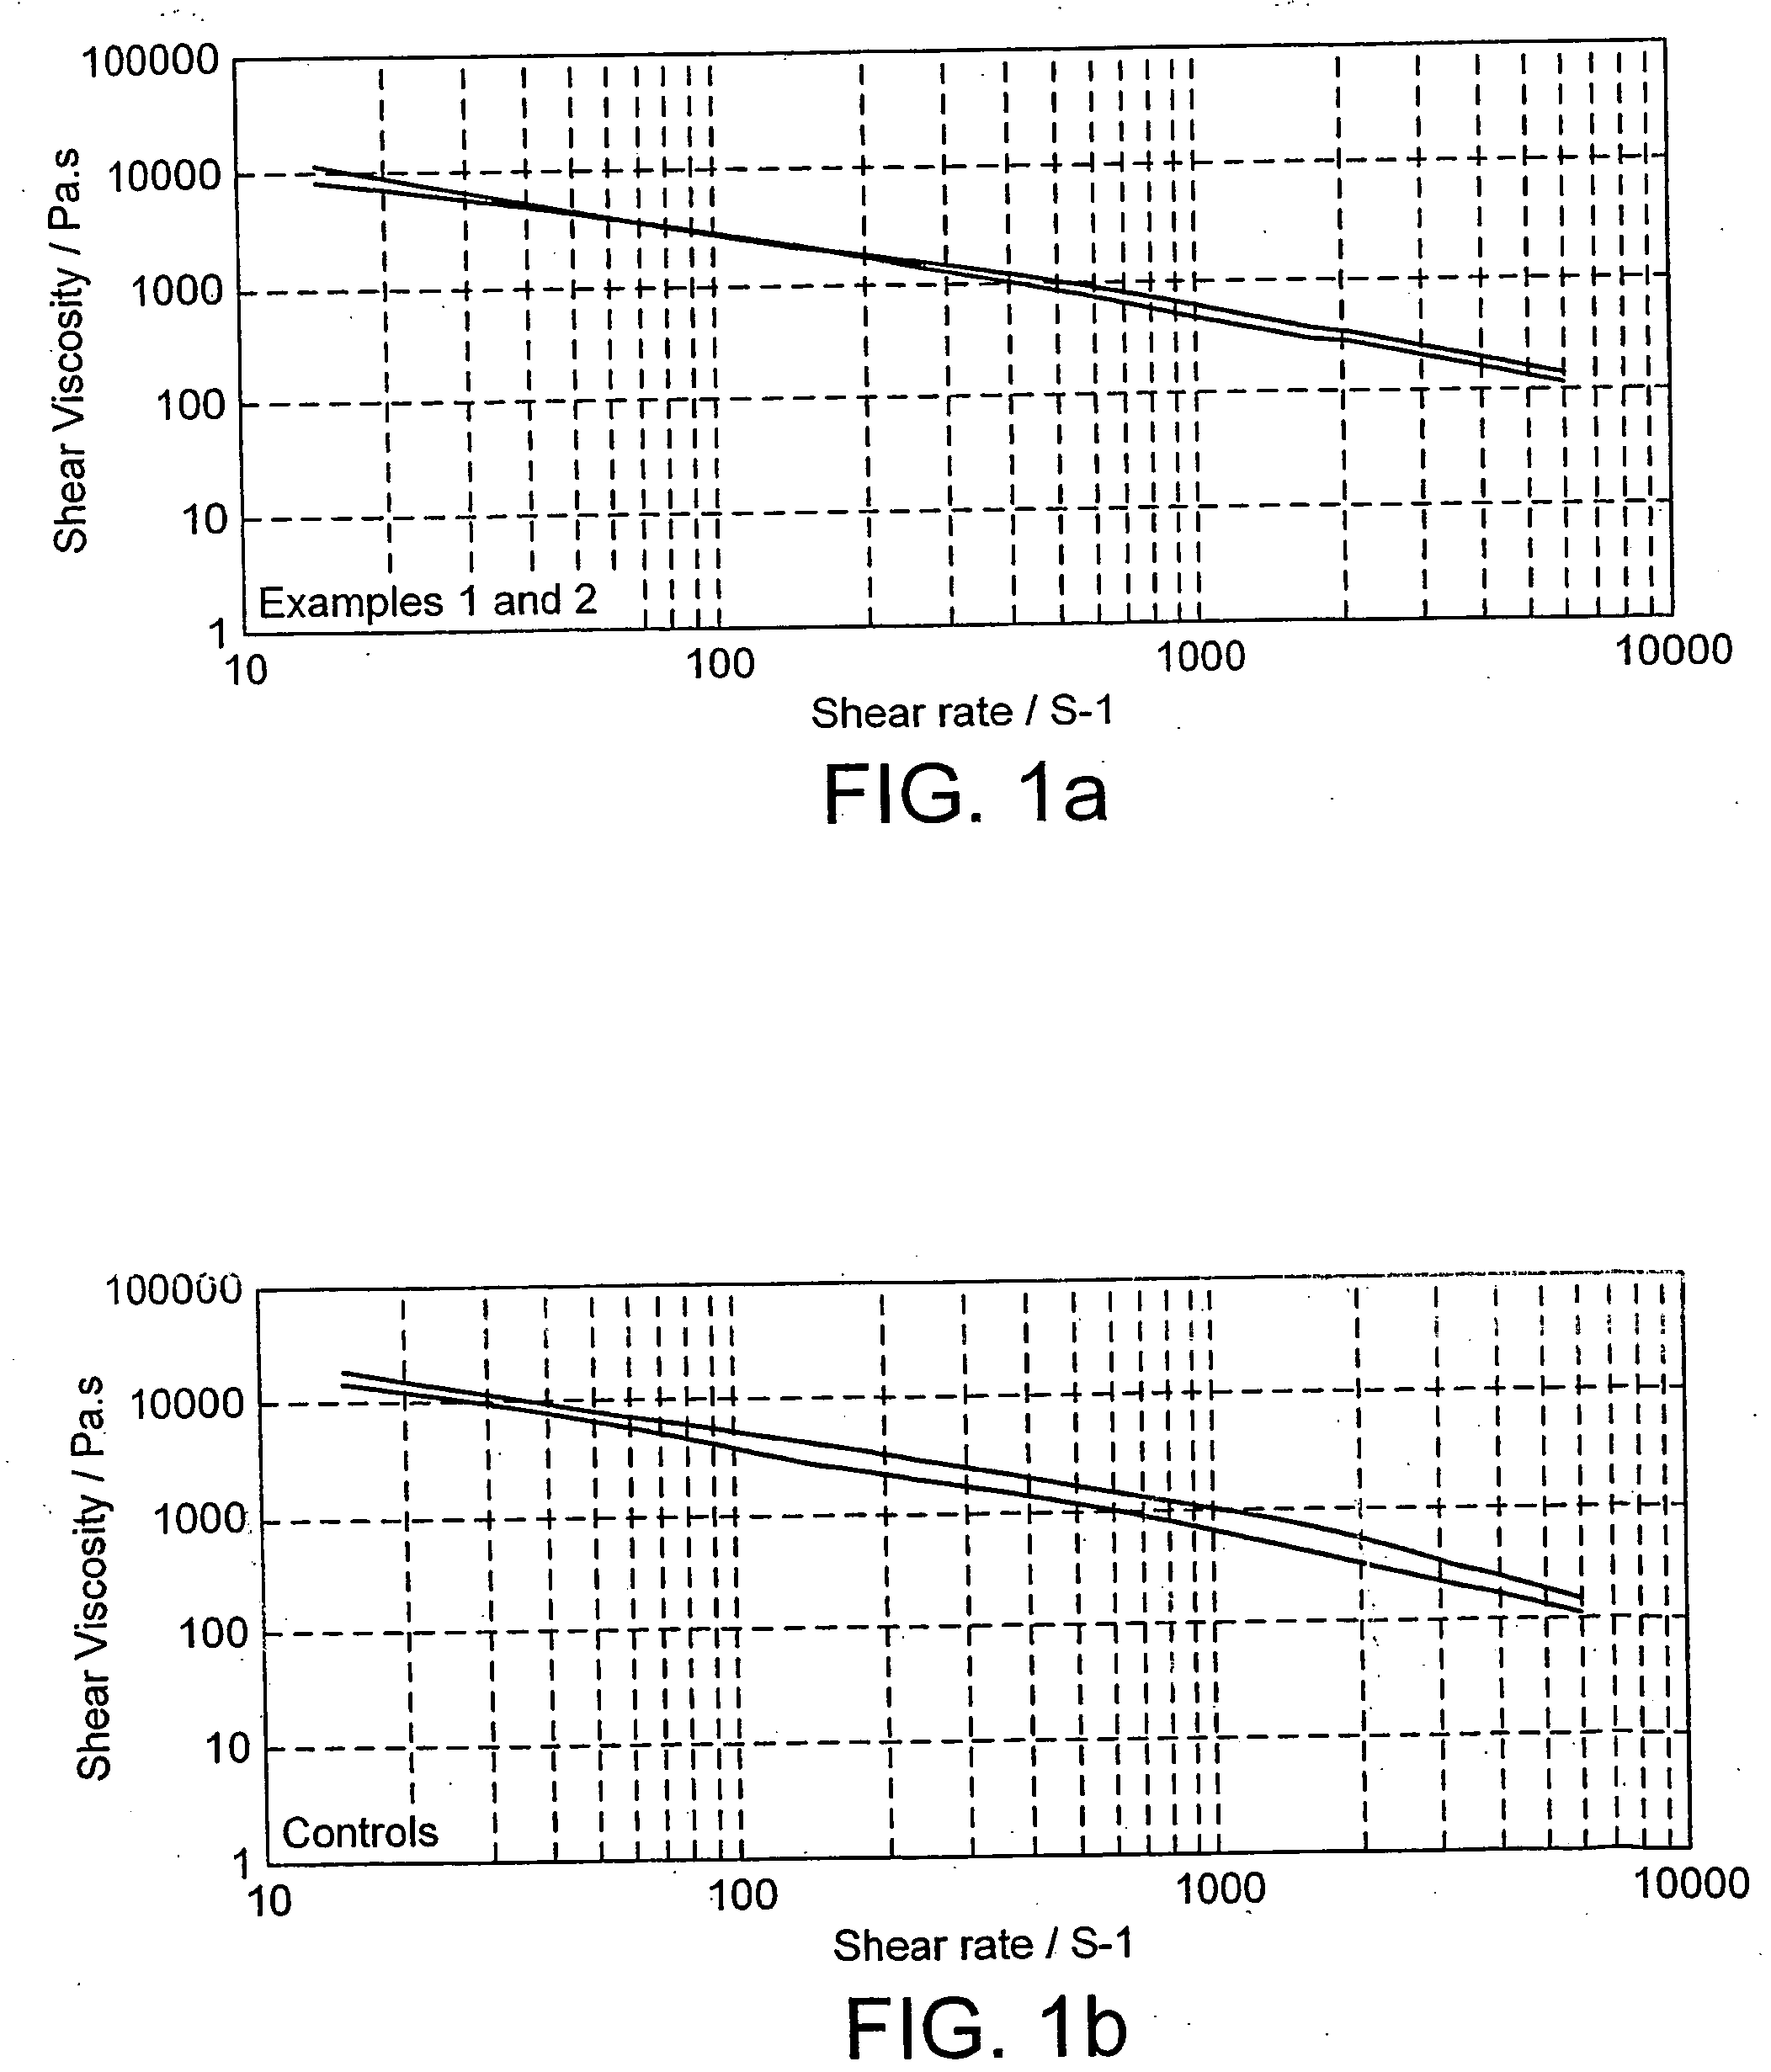 Flame retardant polymer compositions comprising a particulate clay mineral